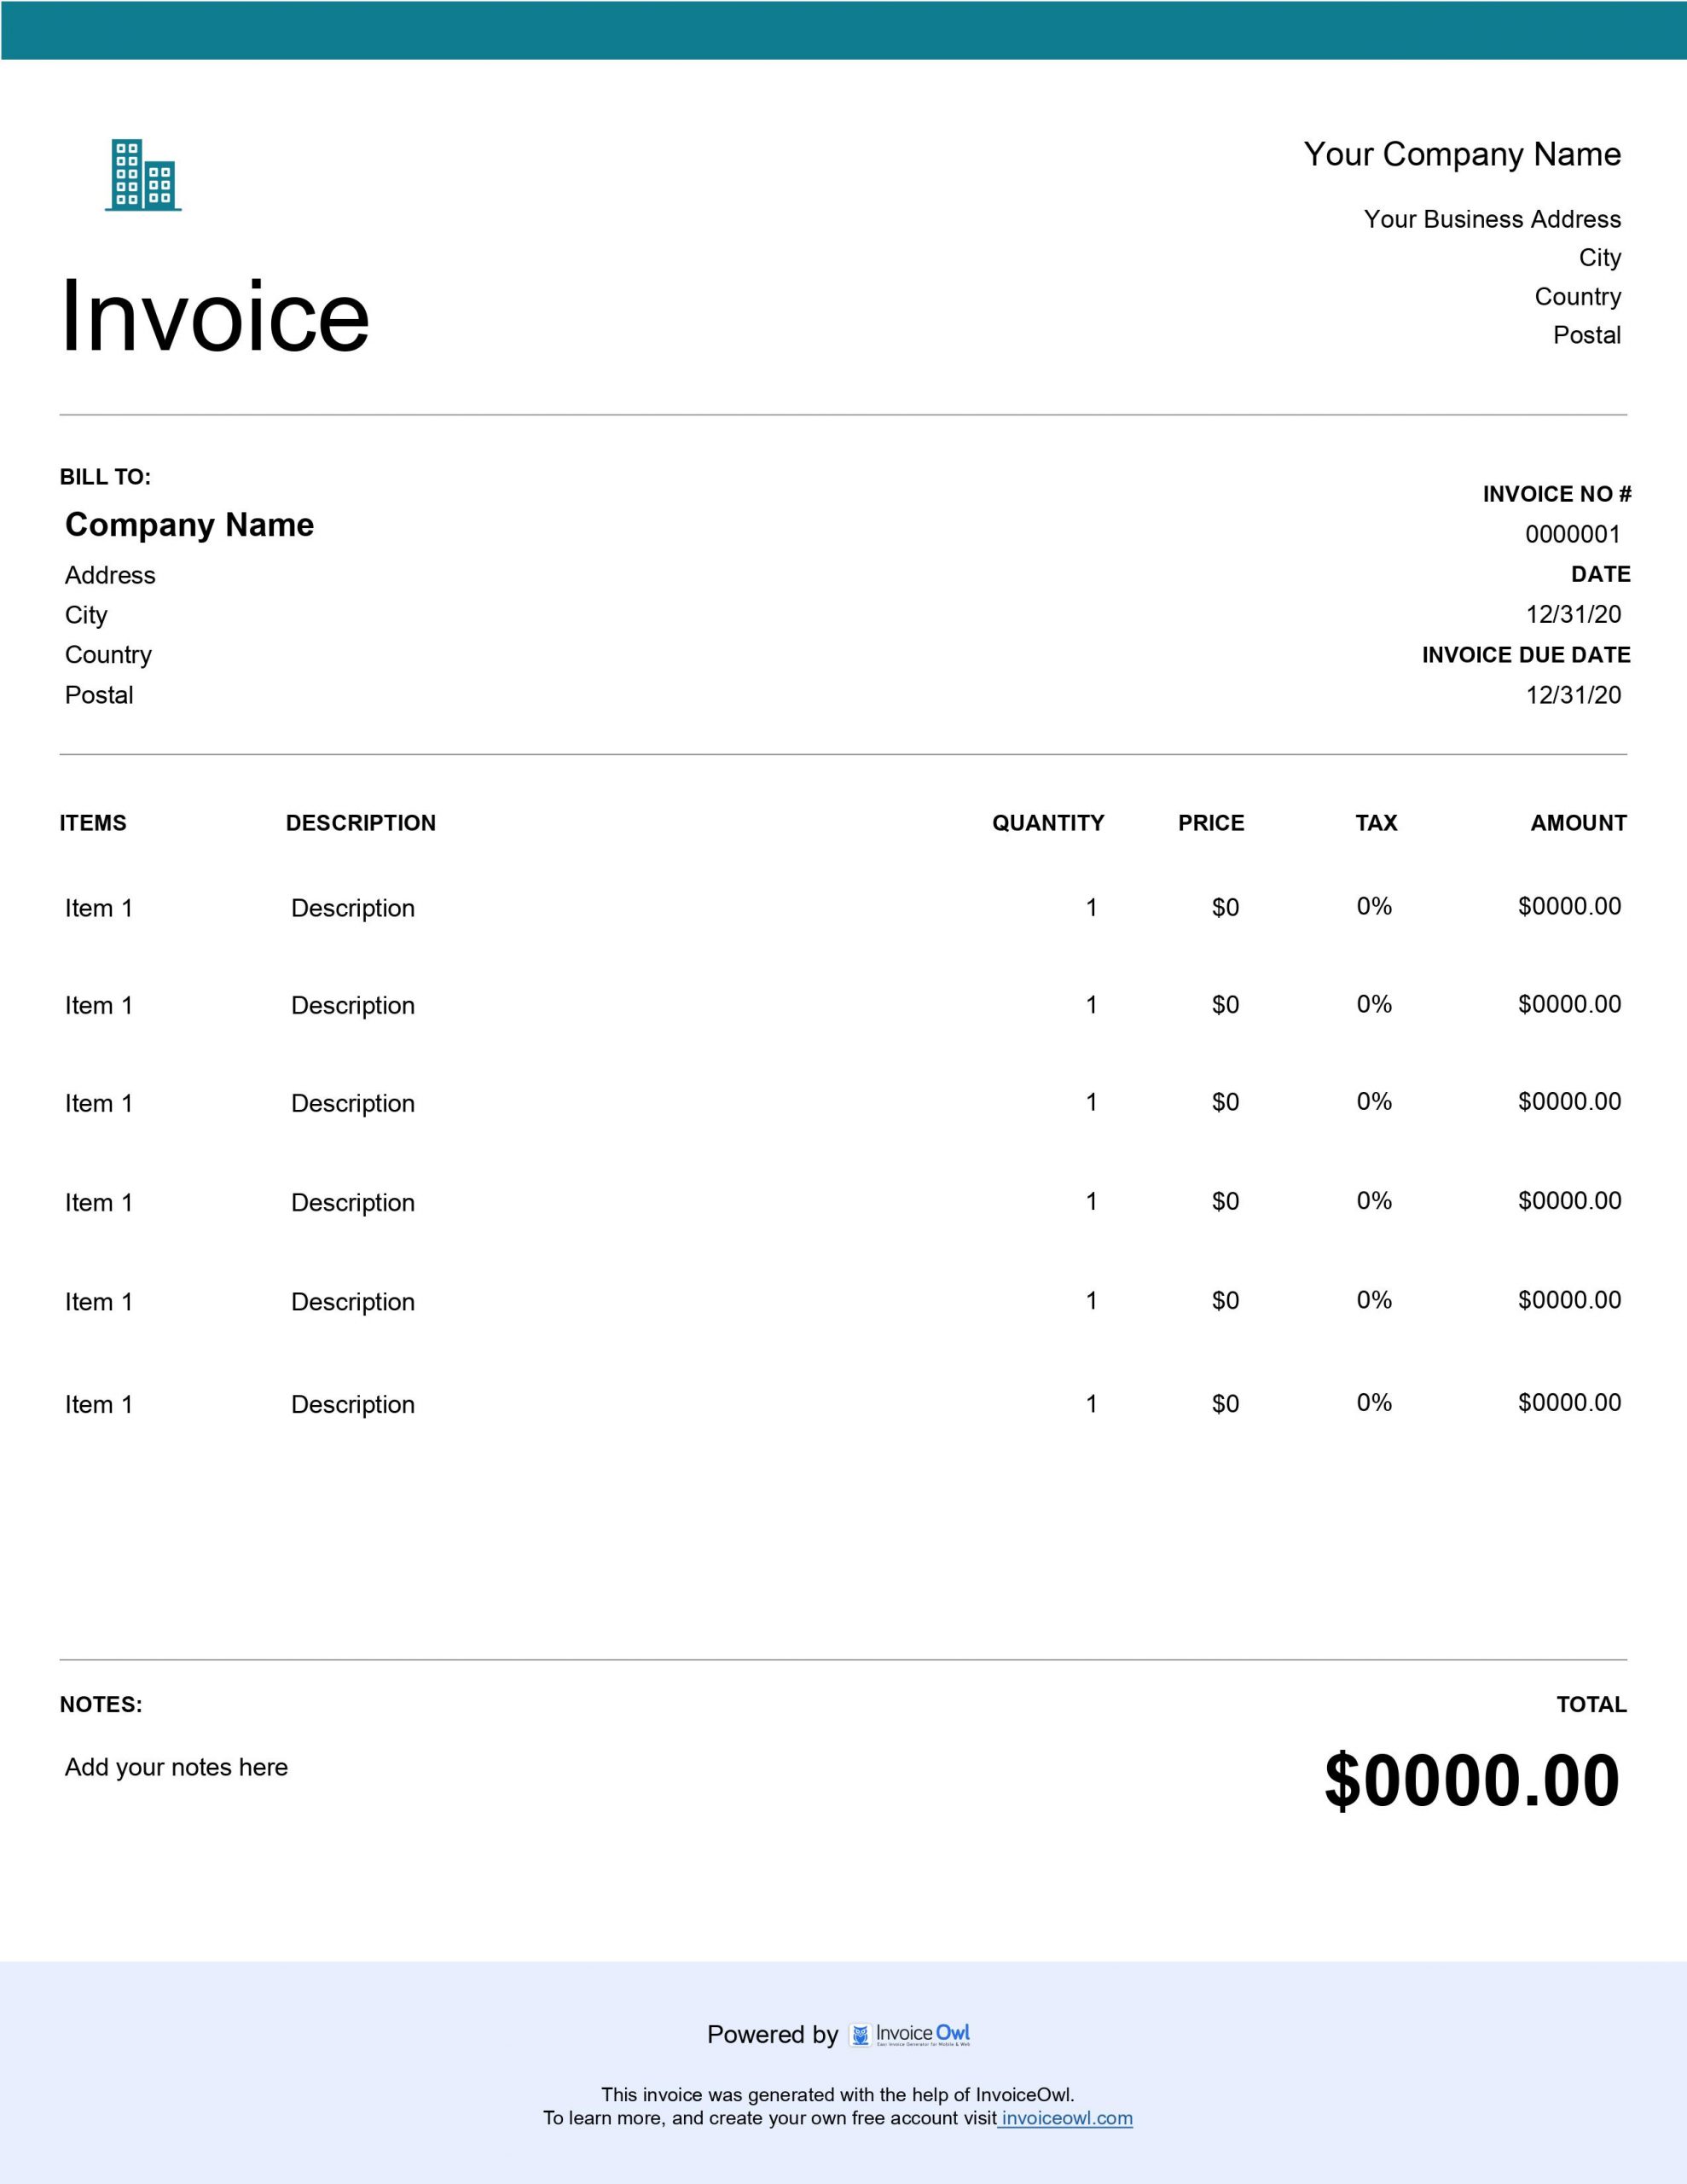 Download free invoice template